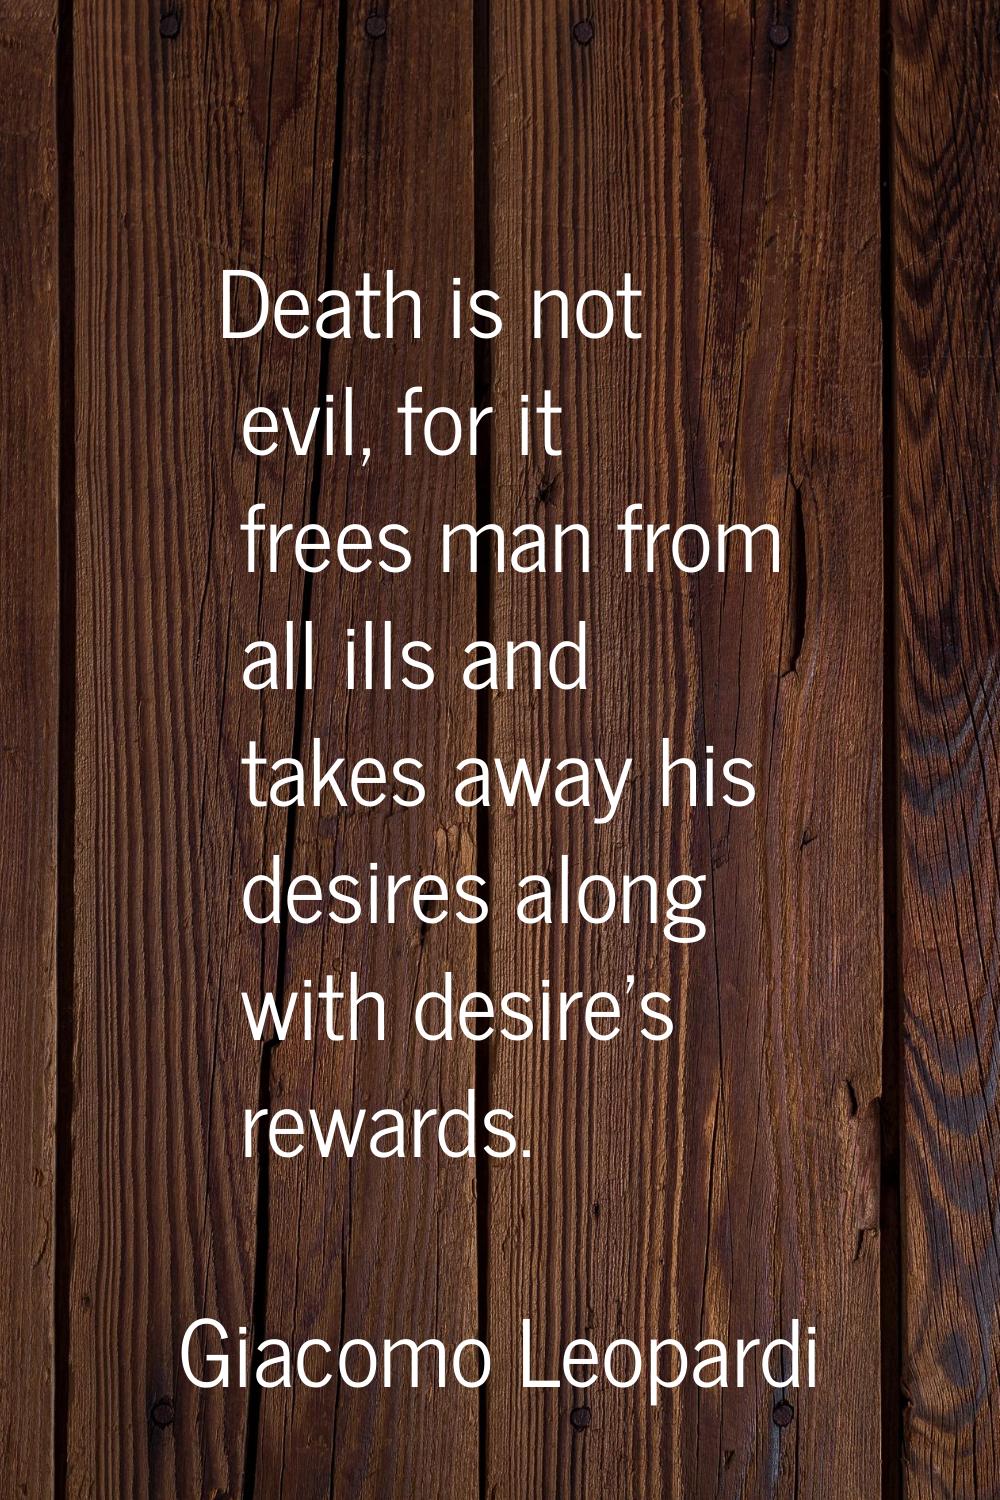 Death is not evil, for it frees man from all ills and takes away his desires along with desire's re